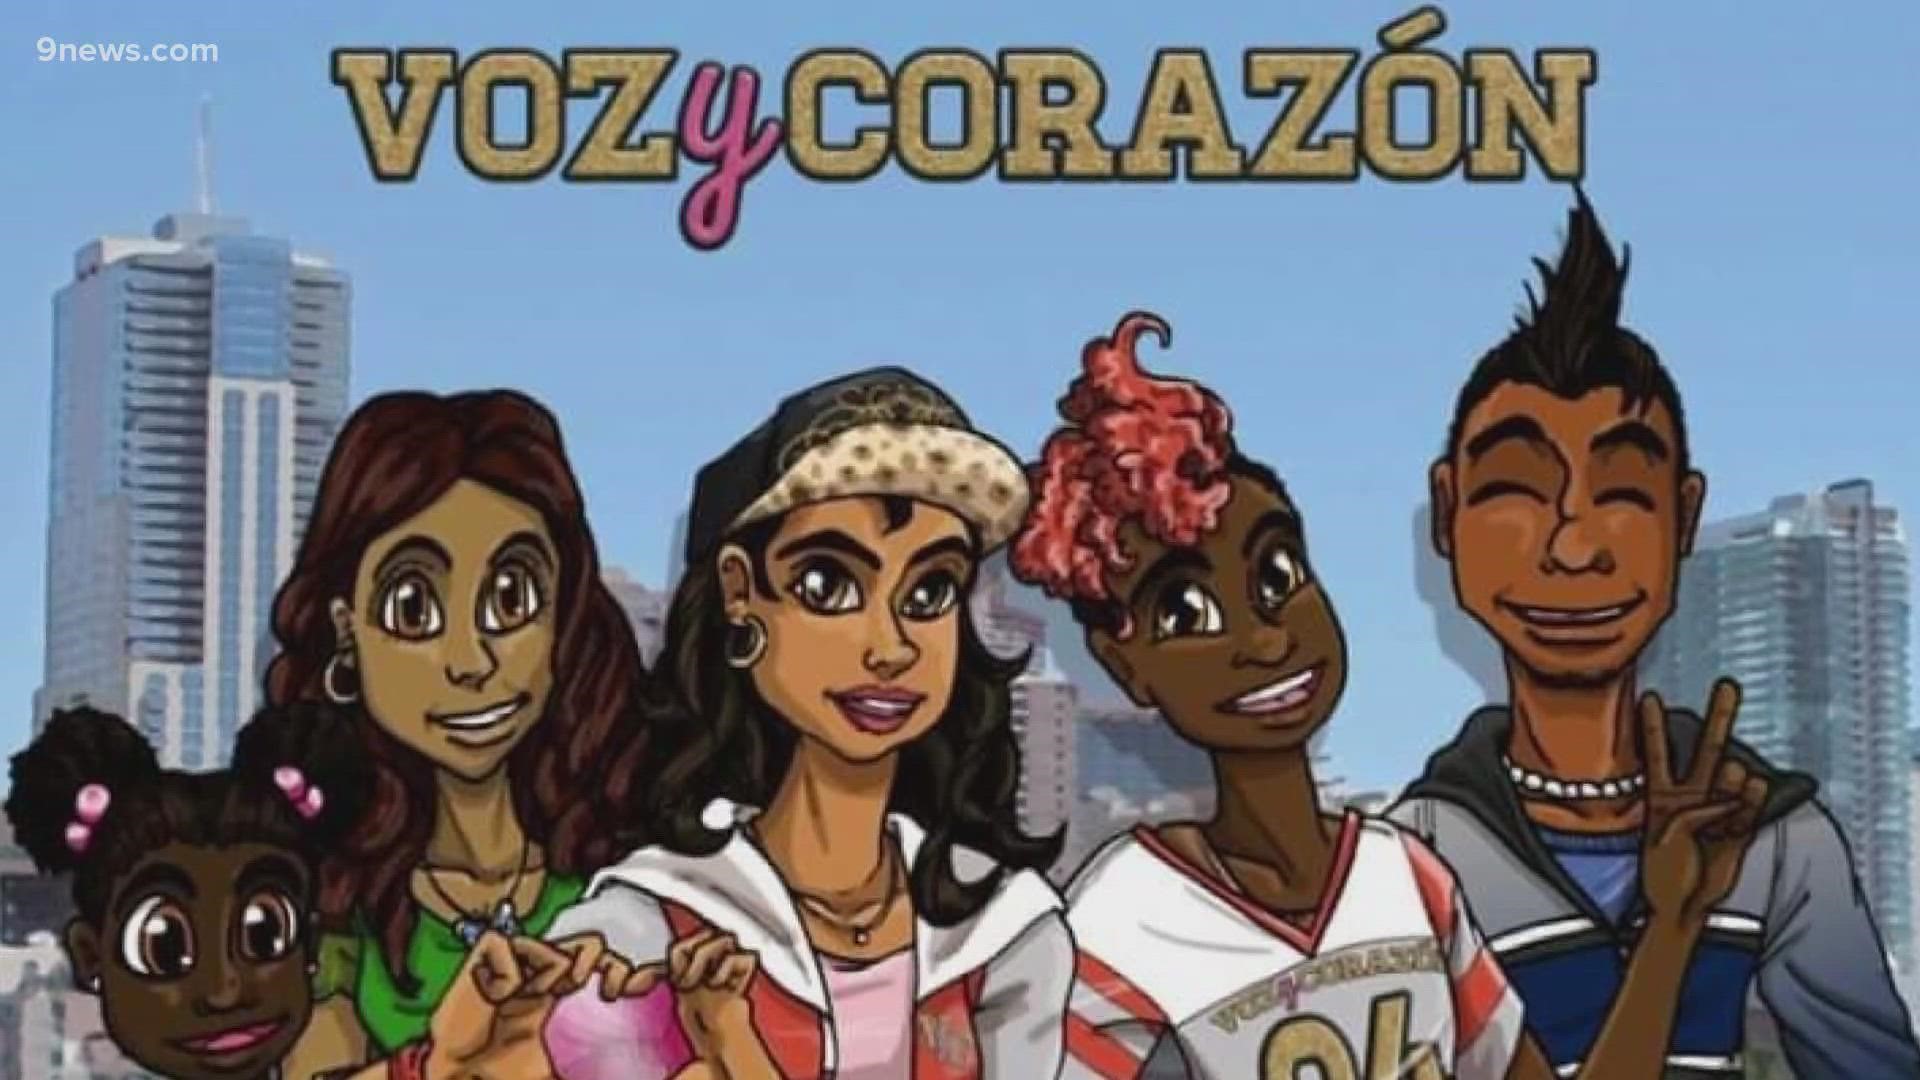 Voz y Corazón offers help for people struggling with the pressures that come with being the first in the family to navigate life in the U.S.